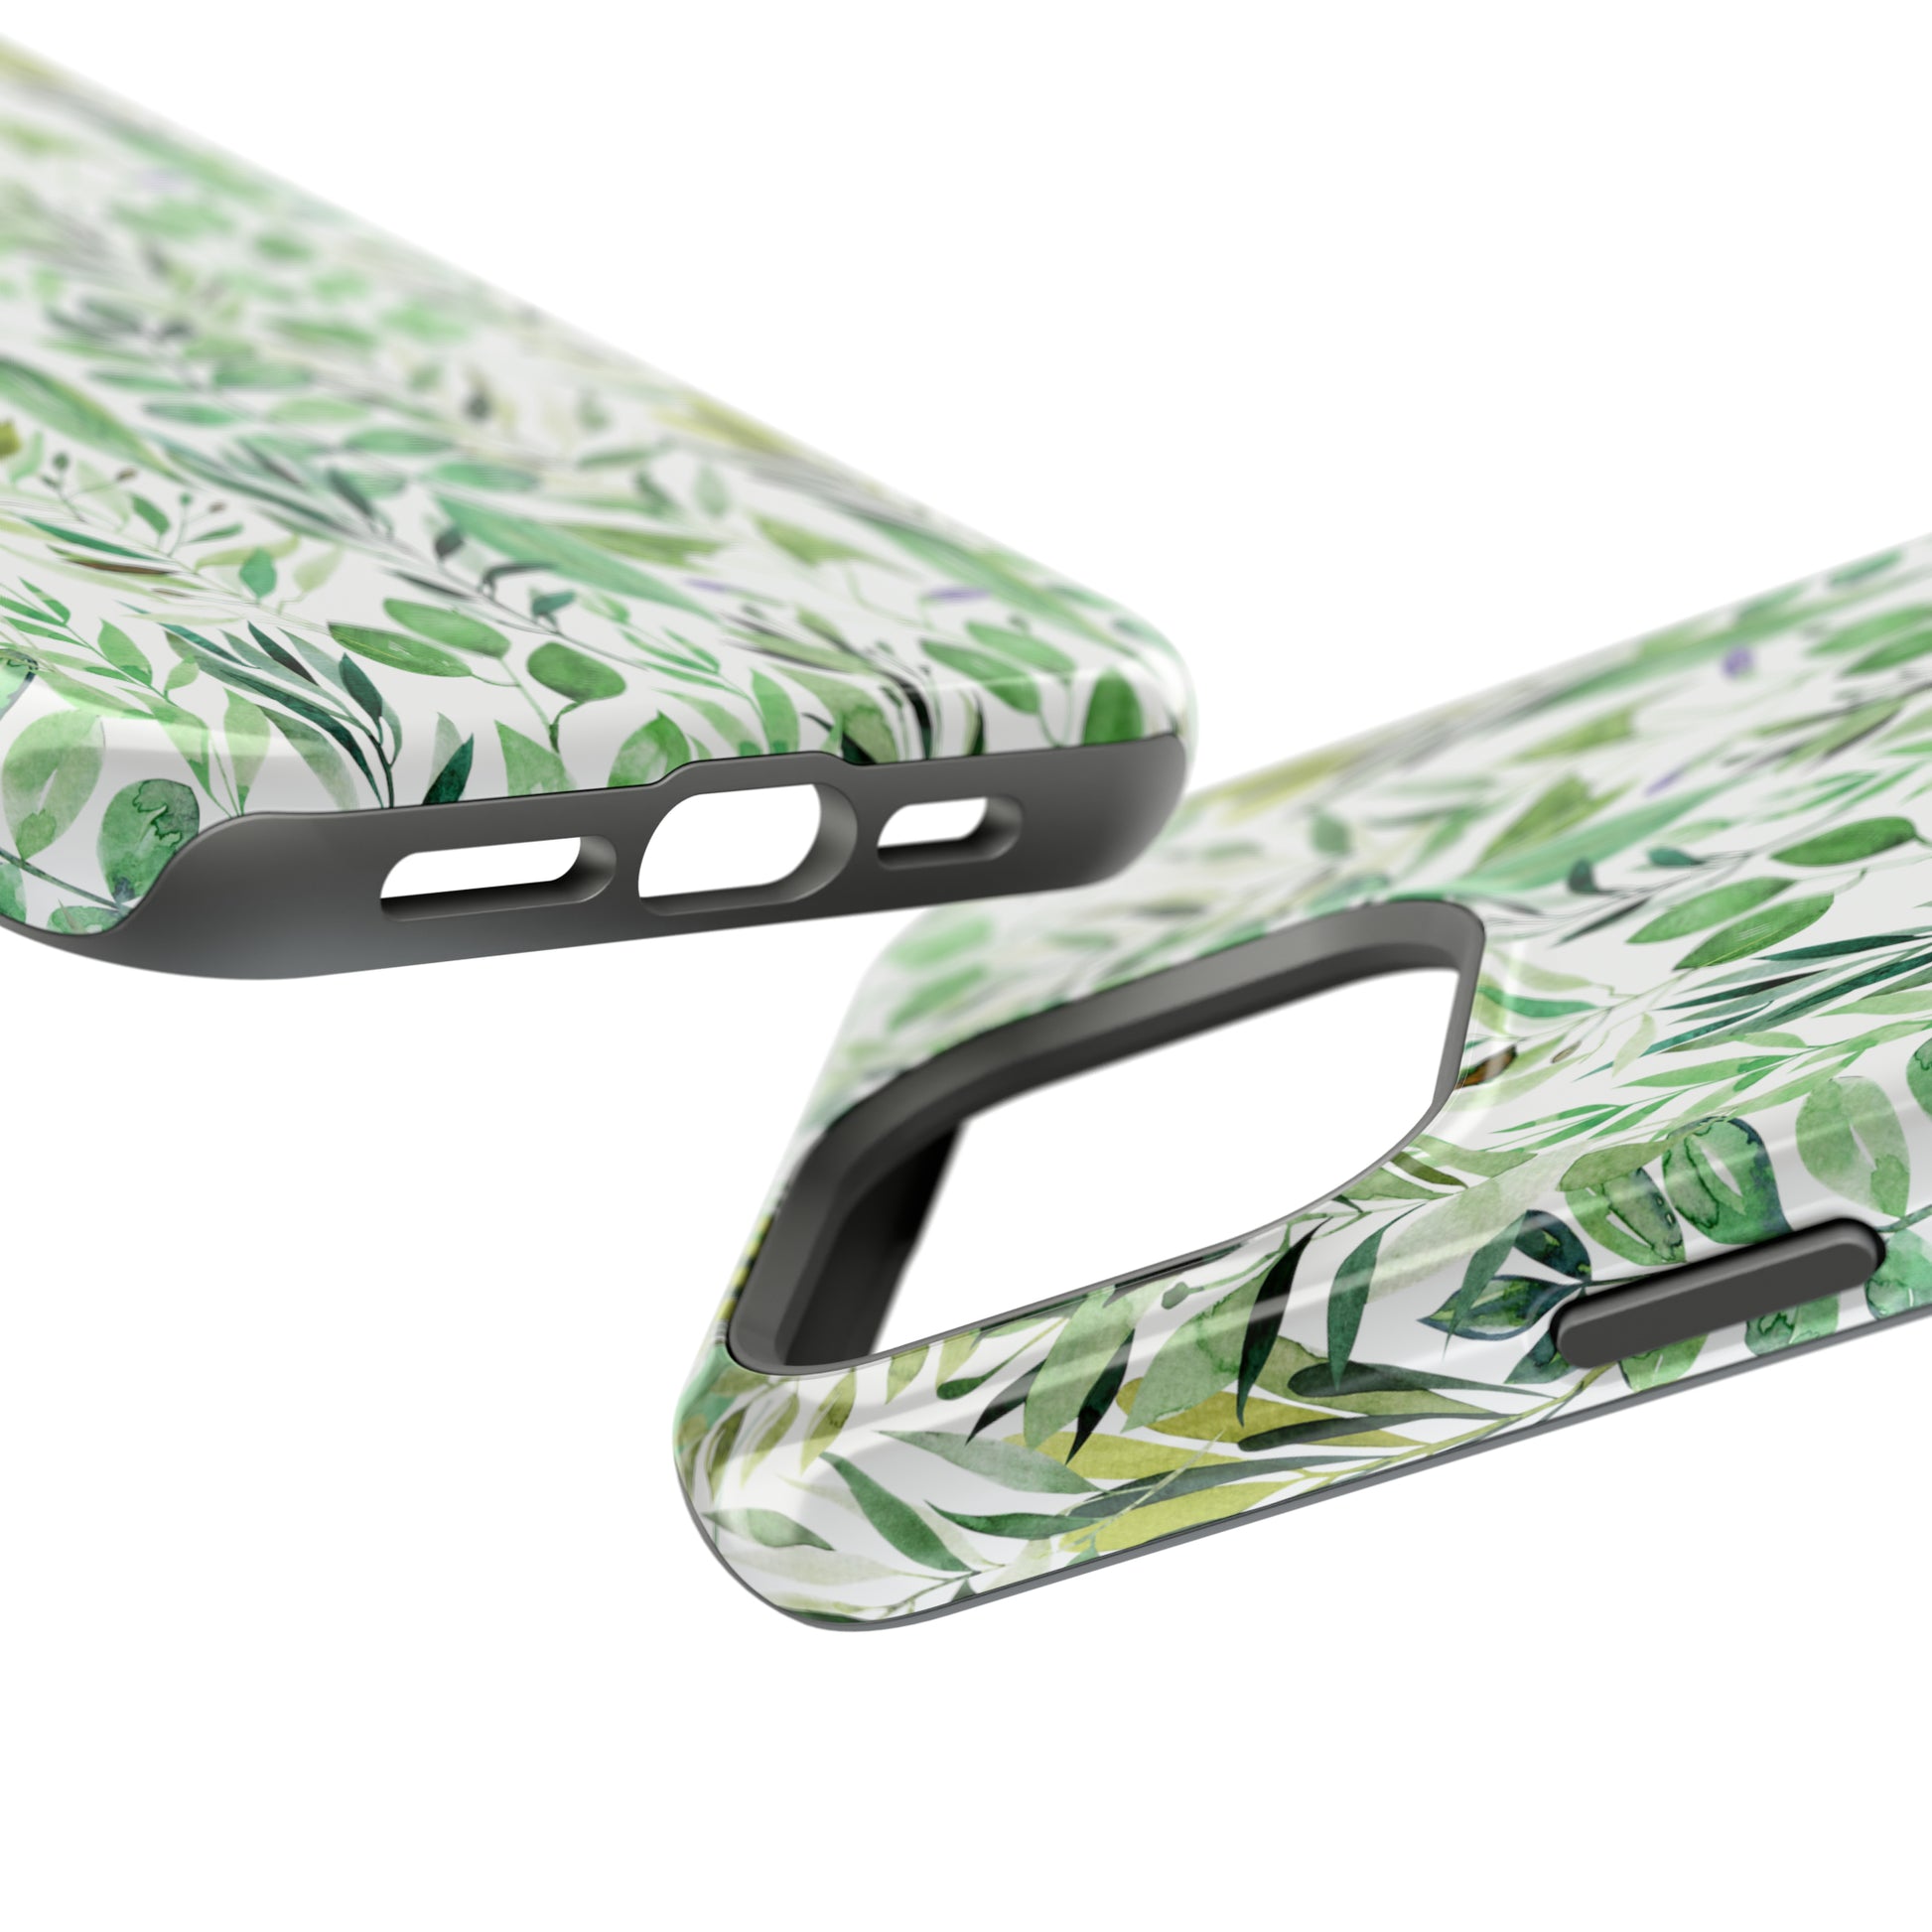 Watercolor Wildflower Green Mobile Phone Case